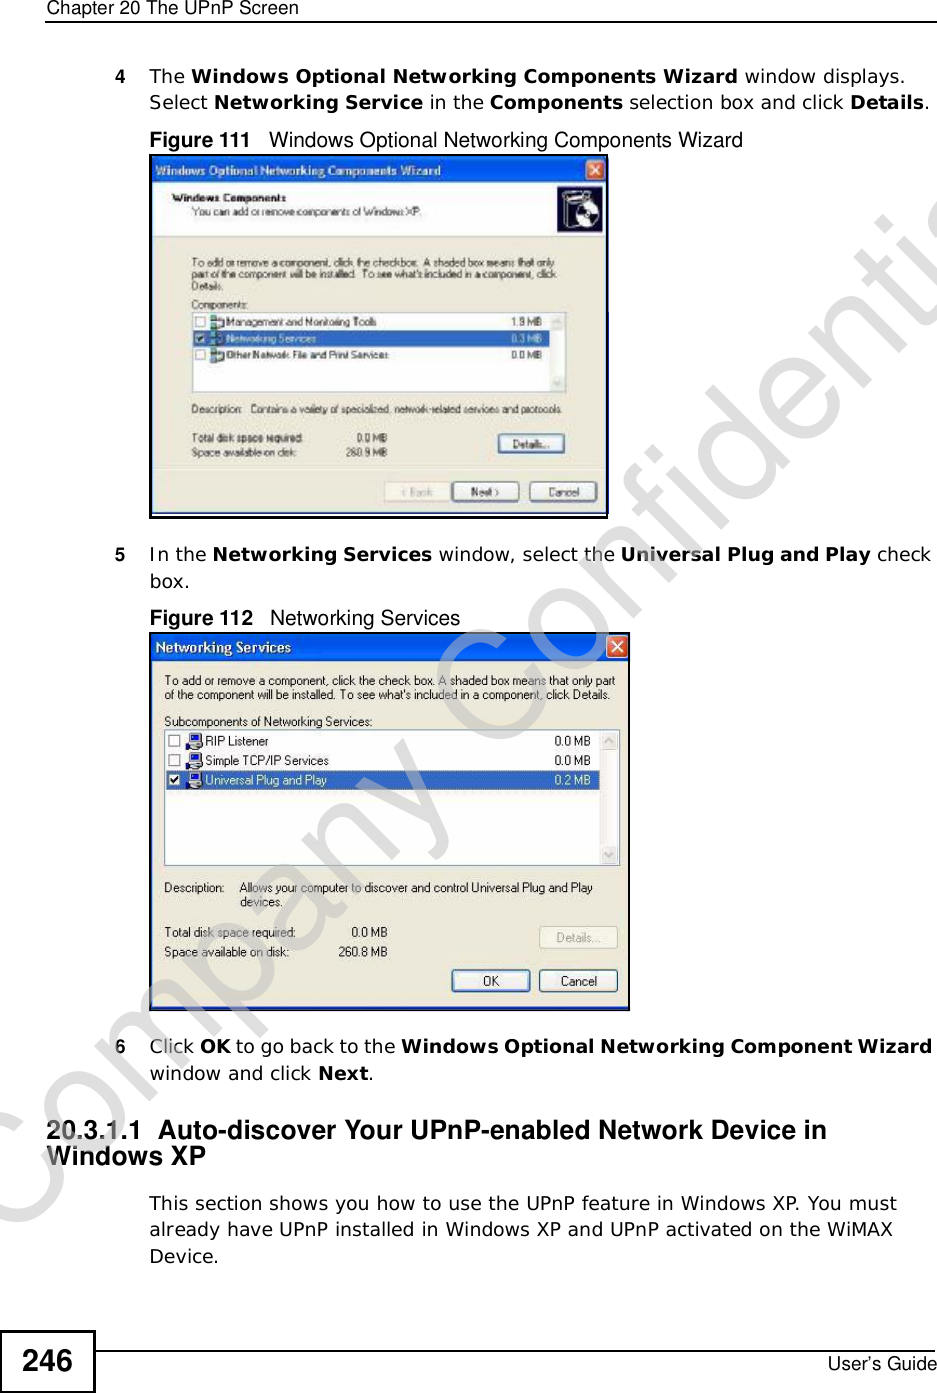 Chapter 20The UPnP ScreenUser’s Guide2464The Windows Optional Networking Components Wizard window displays. Select Networking Service in the Components selection box and click Details.Figure 111   Windows Optional Networking Components Wizard5In the Networking Services window, select the Universal Plug and Play check box. Figure 112   Networking Services6Click OK to go back to the Windows Optional Networking Component Wizard window and click Next.20.3.1.1  Auto-discover Your UPnP-enabled Network Device in Windows XPThis section shows you how to use the UPnP feature in Windows XP. You must already have UPnP installed in Windows XP and UPnP activated on the WiMAX Device.Company Confidential